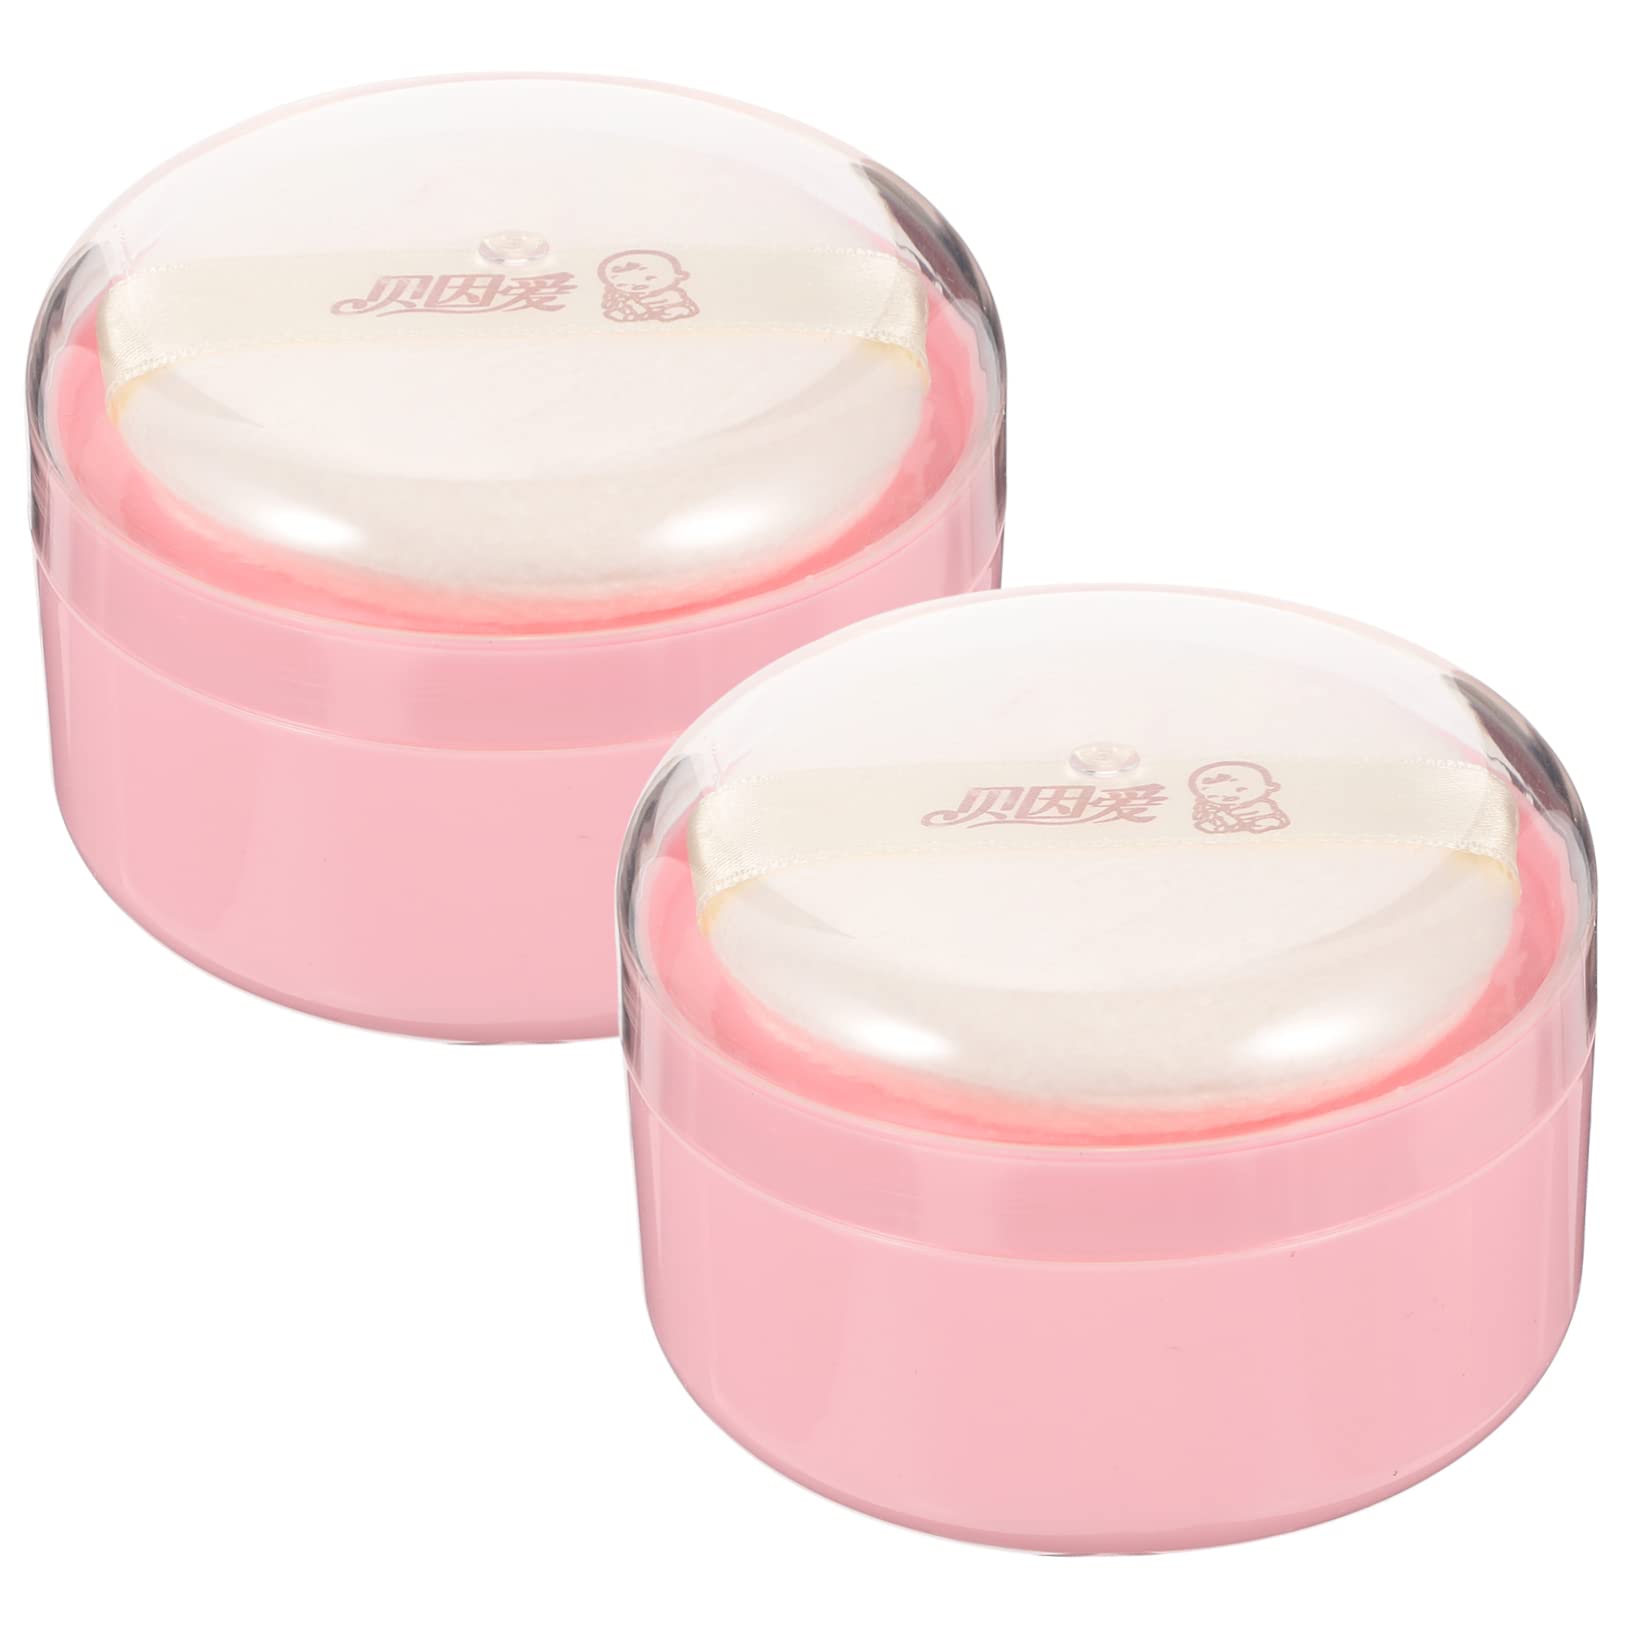 Powder Travel Container Body Powder Puff and Container Makeup